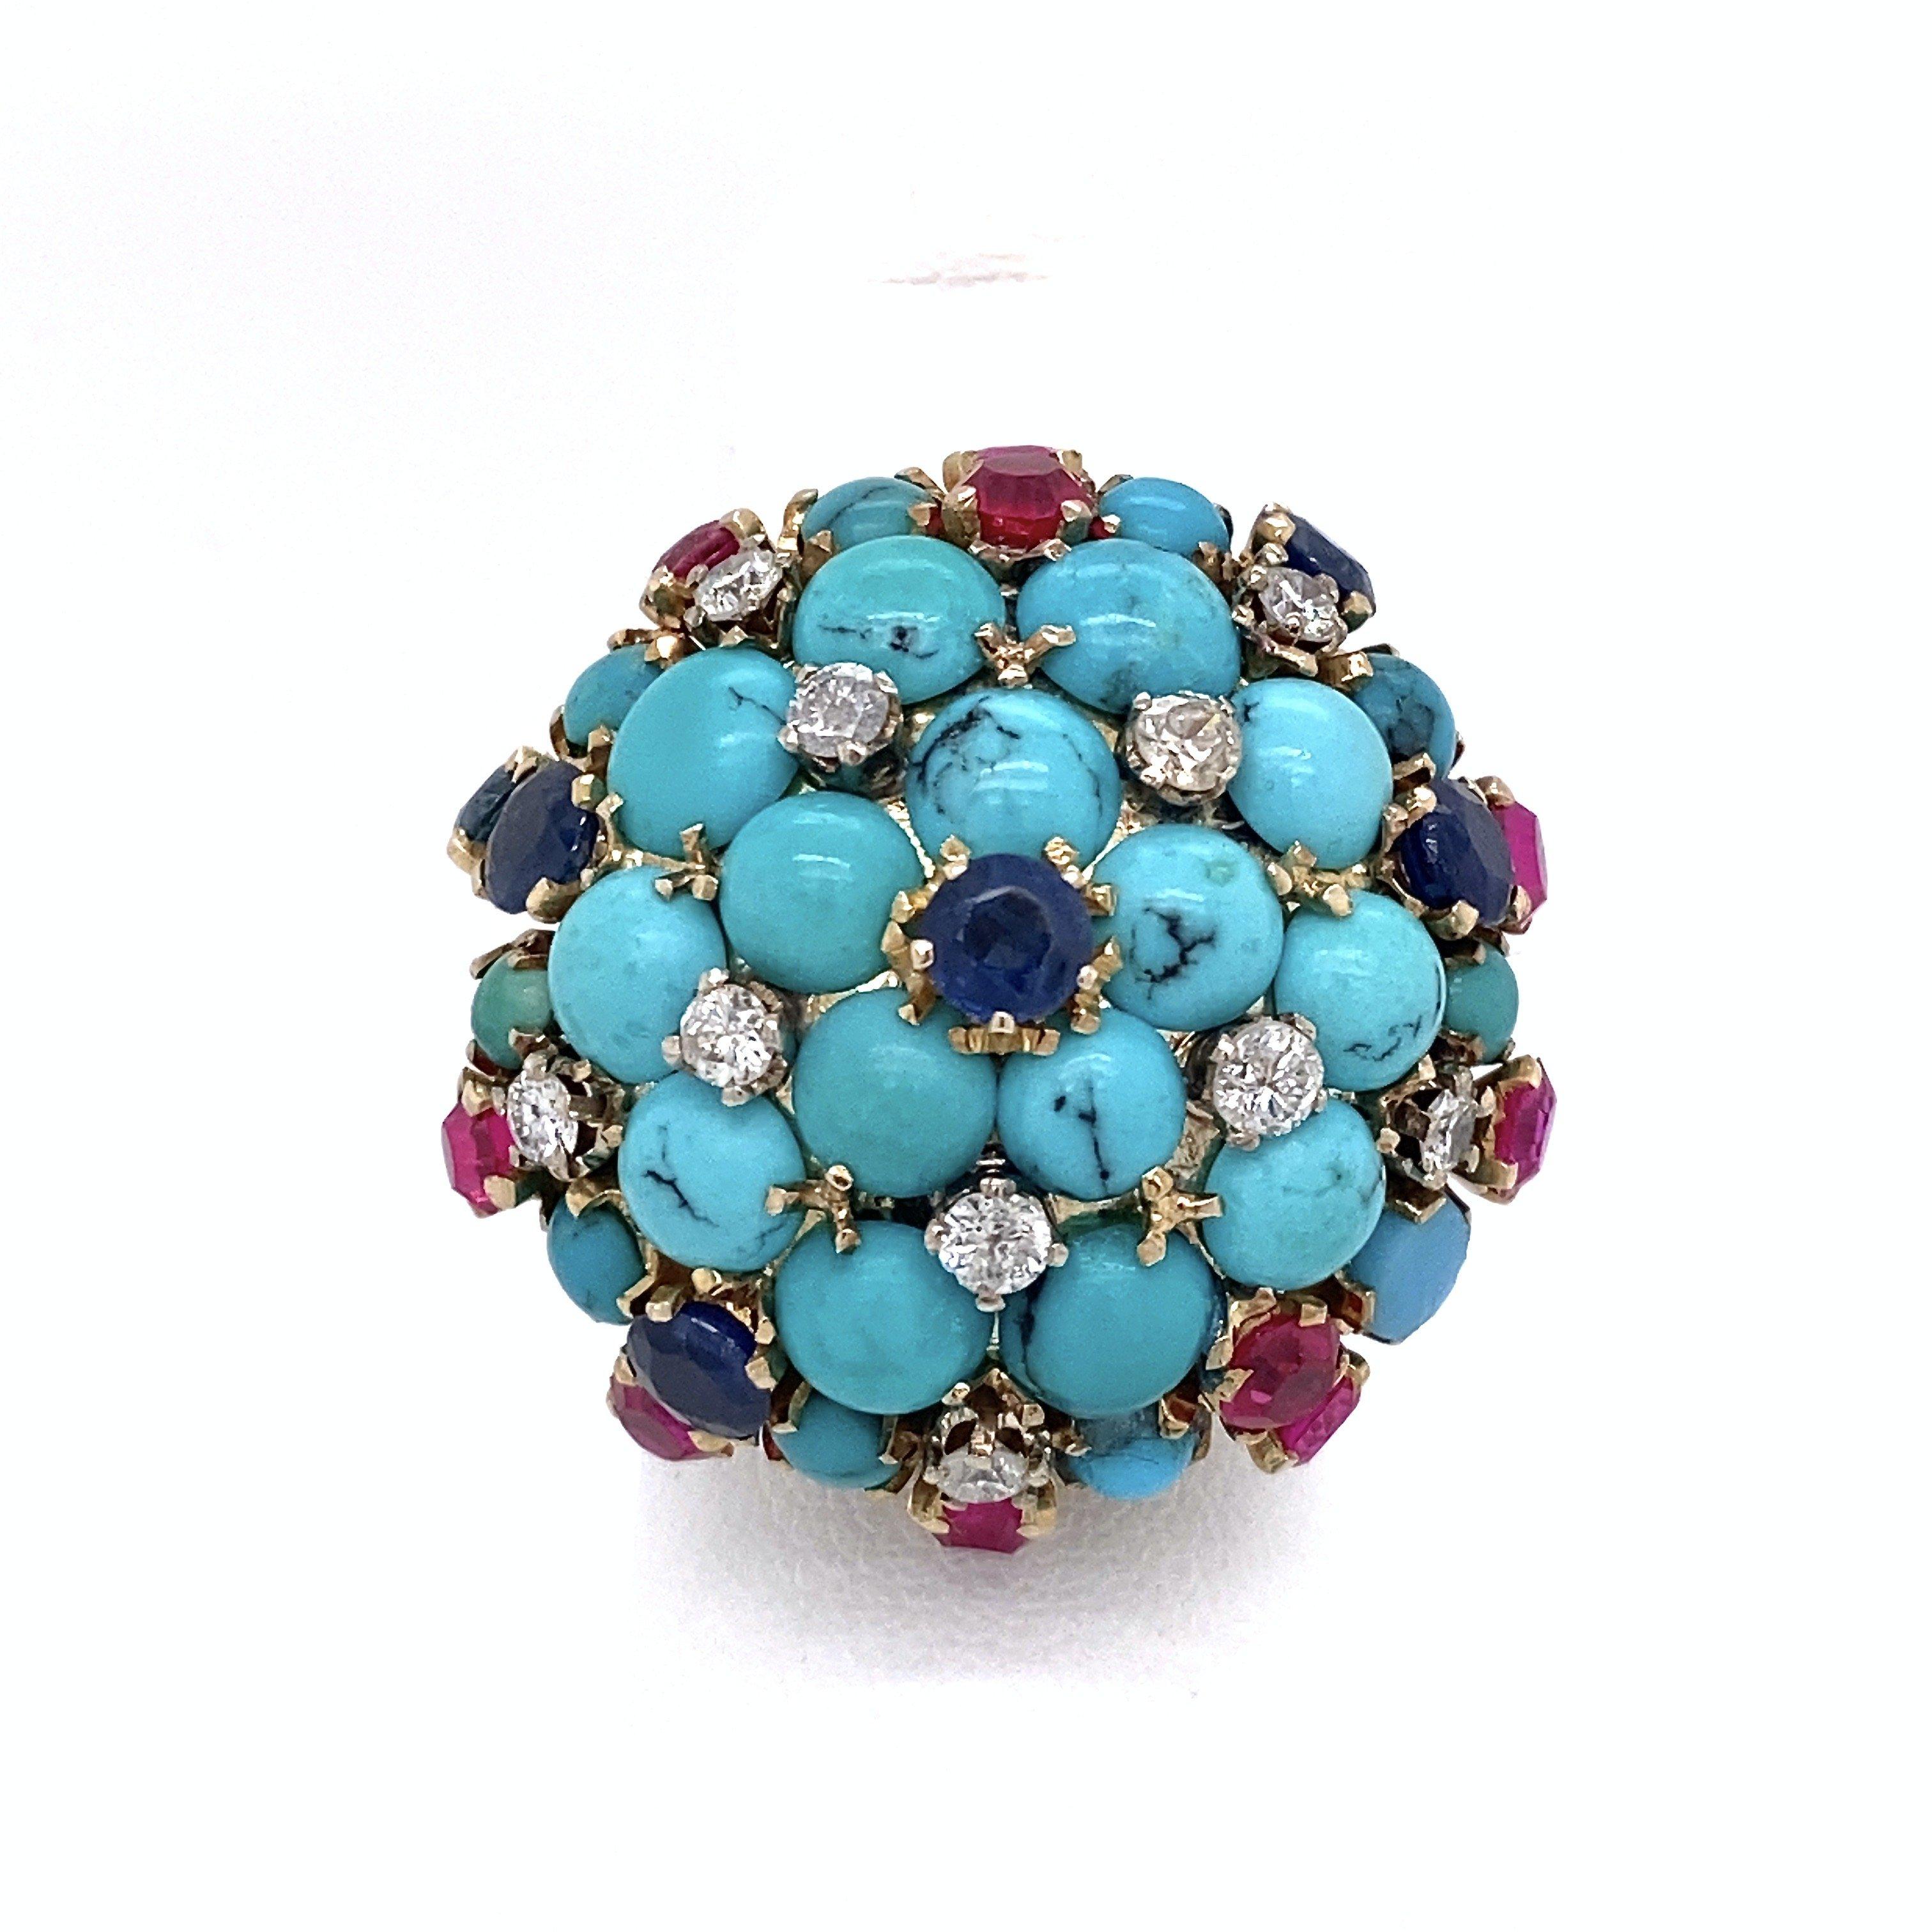 This vintage bombe ring dates from the 1950s and features an array of round, prong-set stones, including turquoise, diamonds, blue sapphires, and rubies set in 14KT yellow gold. The top of the ring is 27mm round, 13mm deep and the shank measures